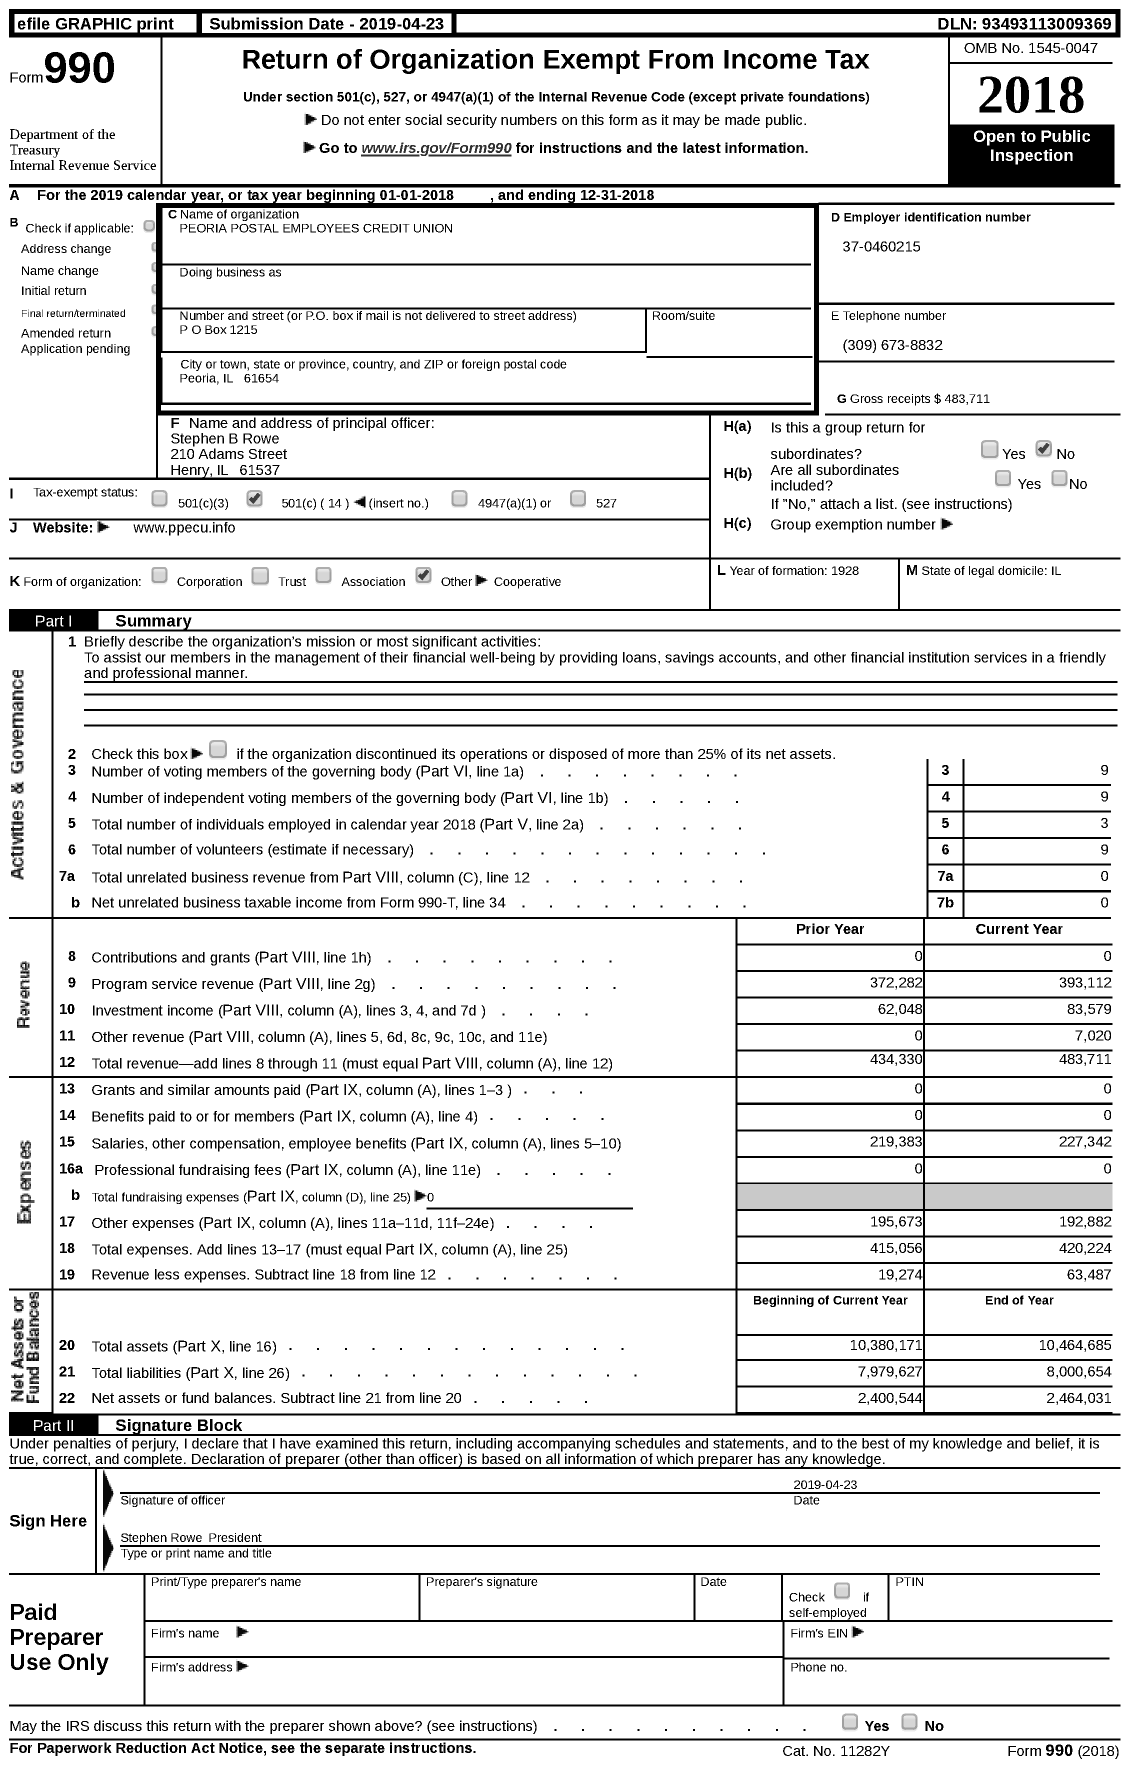 Image of first page of 2018 Form 990 for Peoria Postal Employees Credit Union